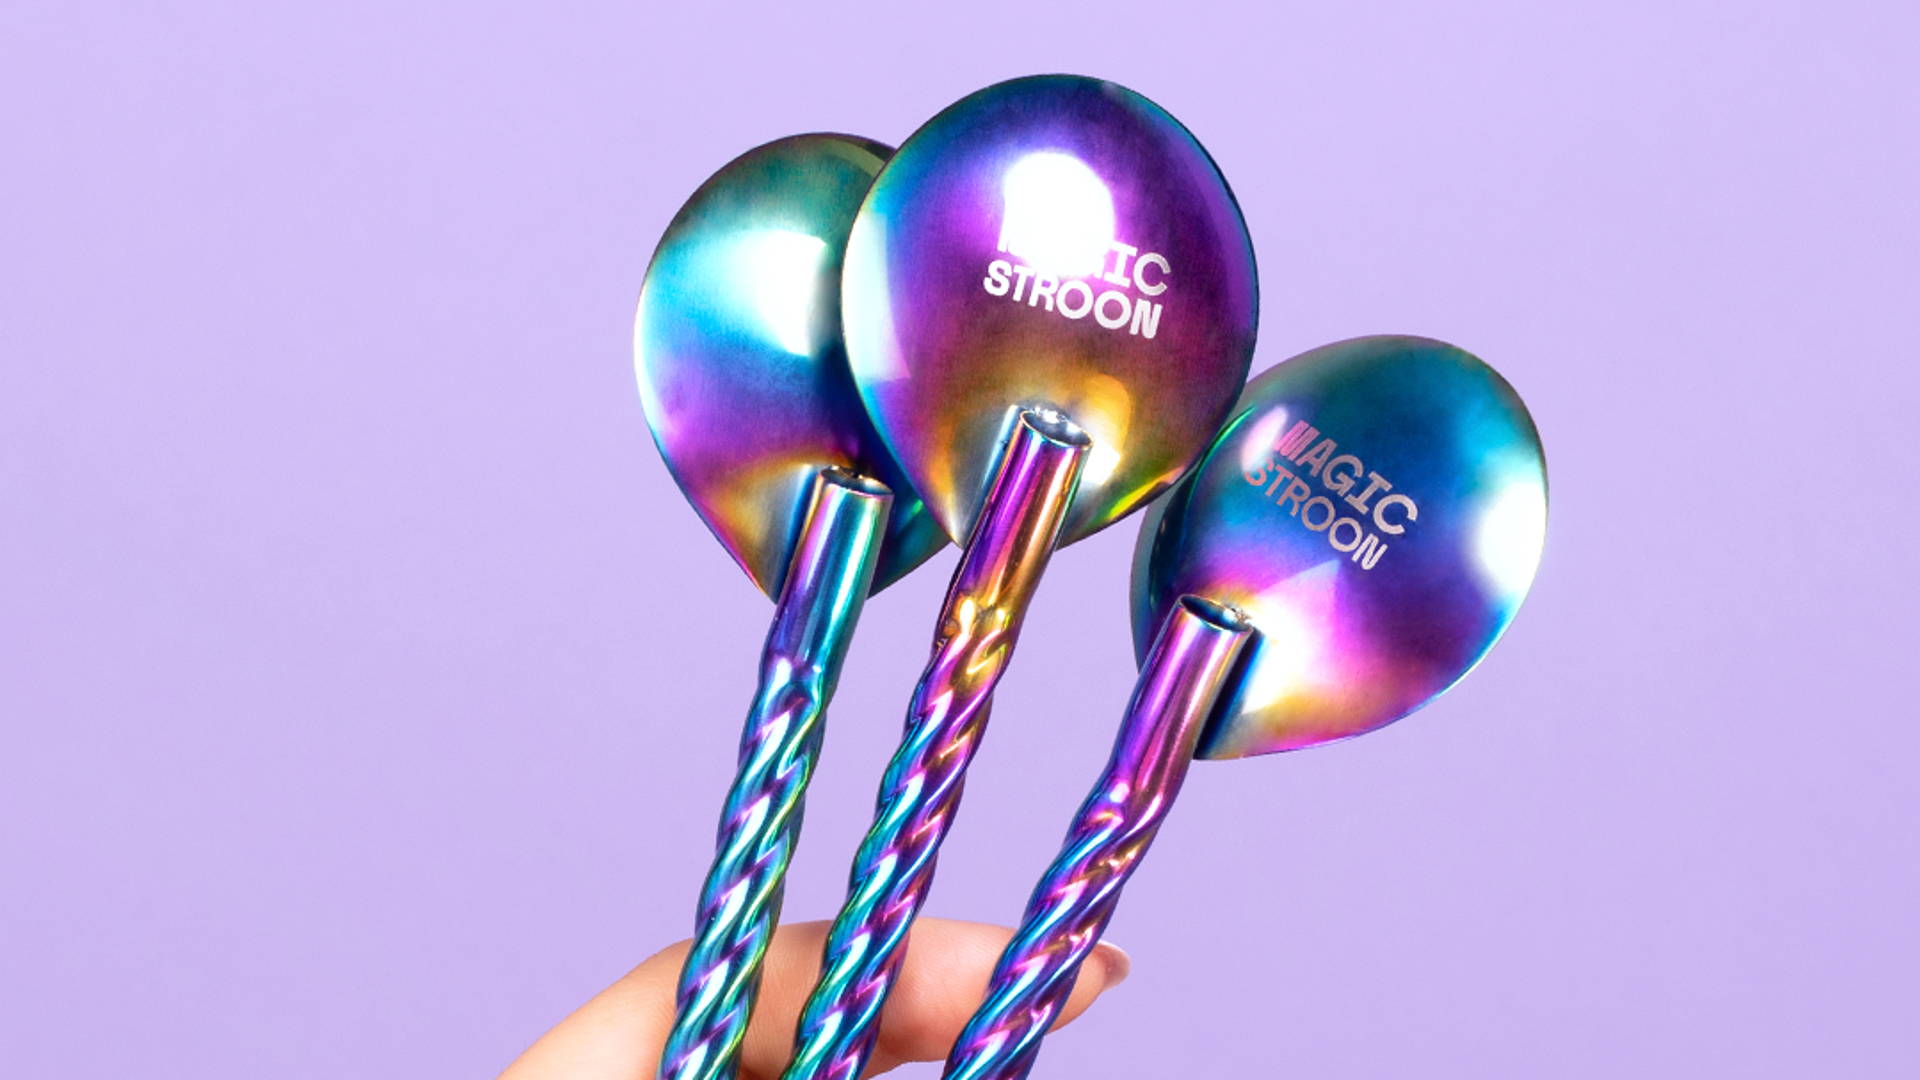 Featured image for Magic Spoon Rebrands as 'Magic Stroon'